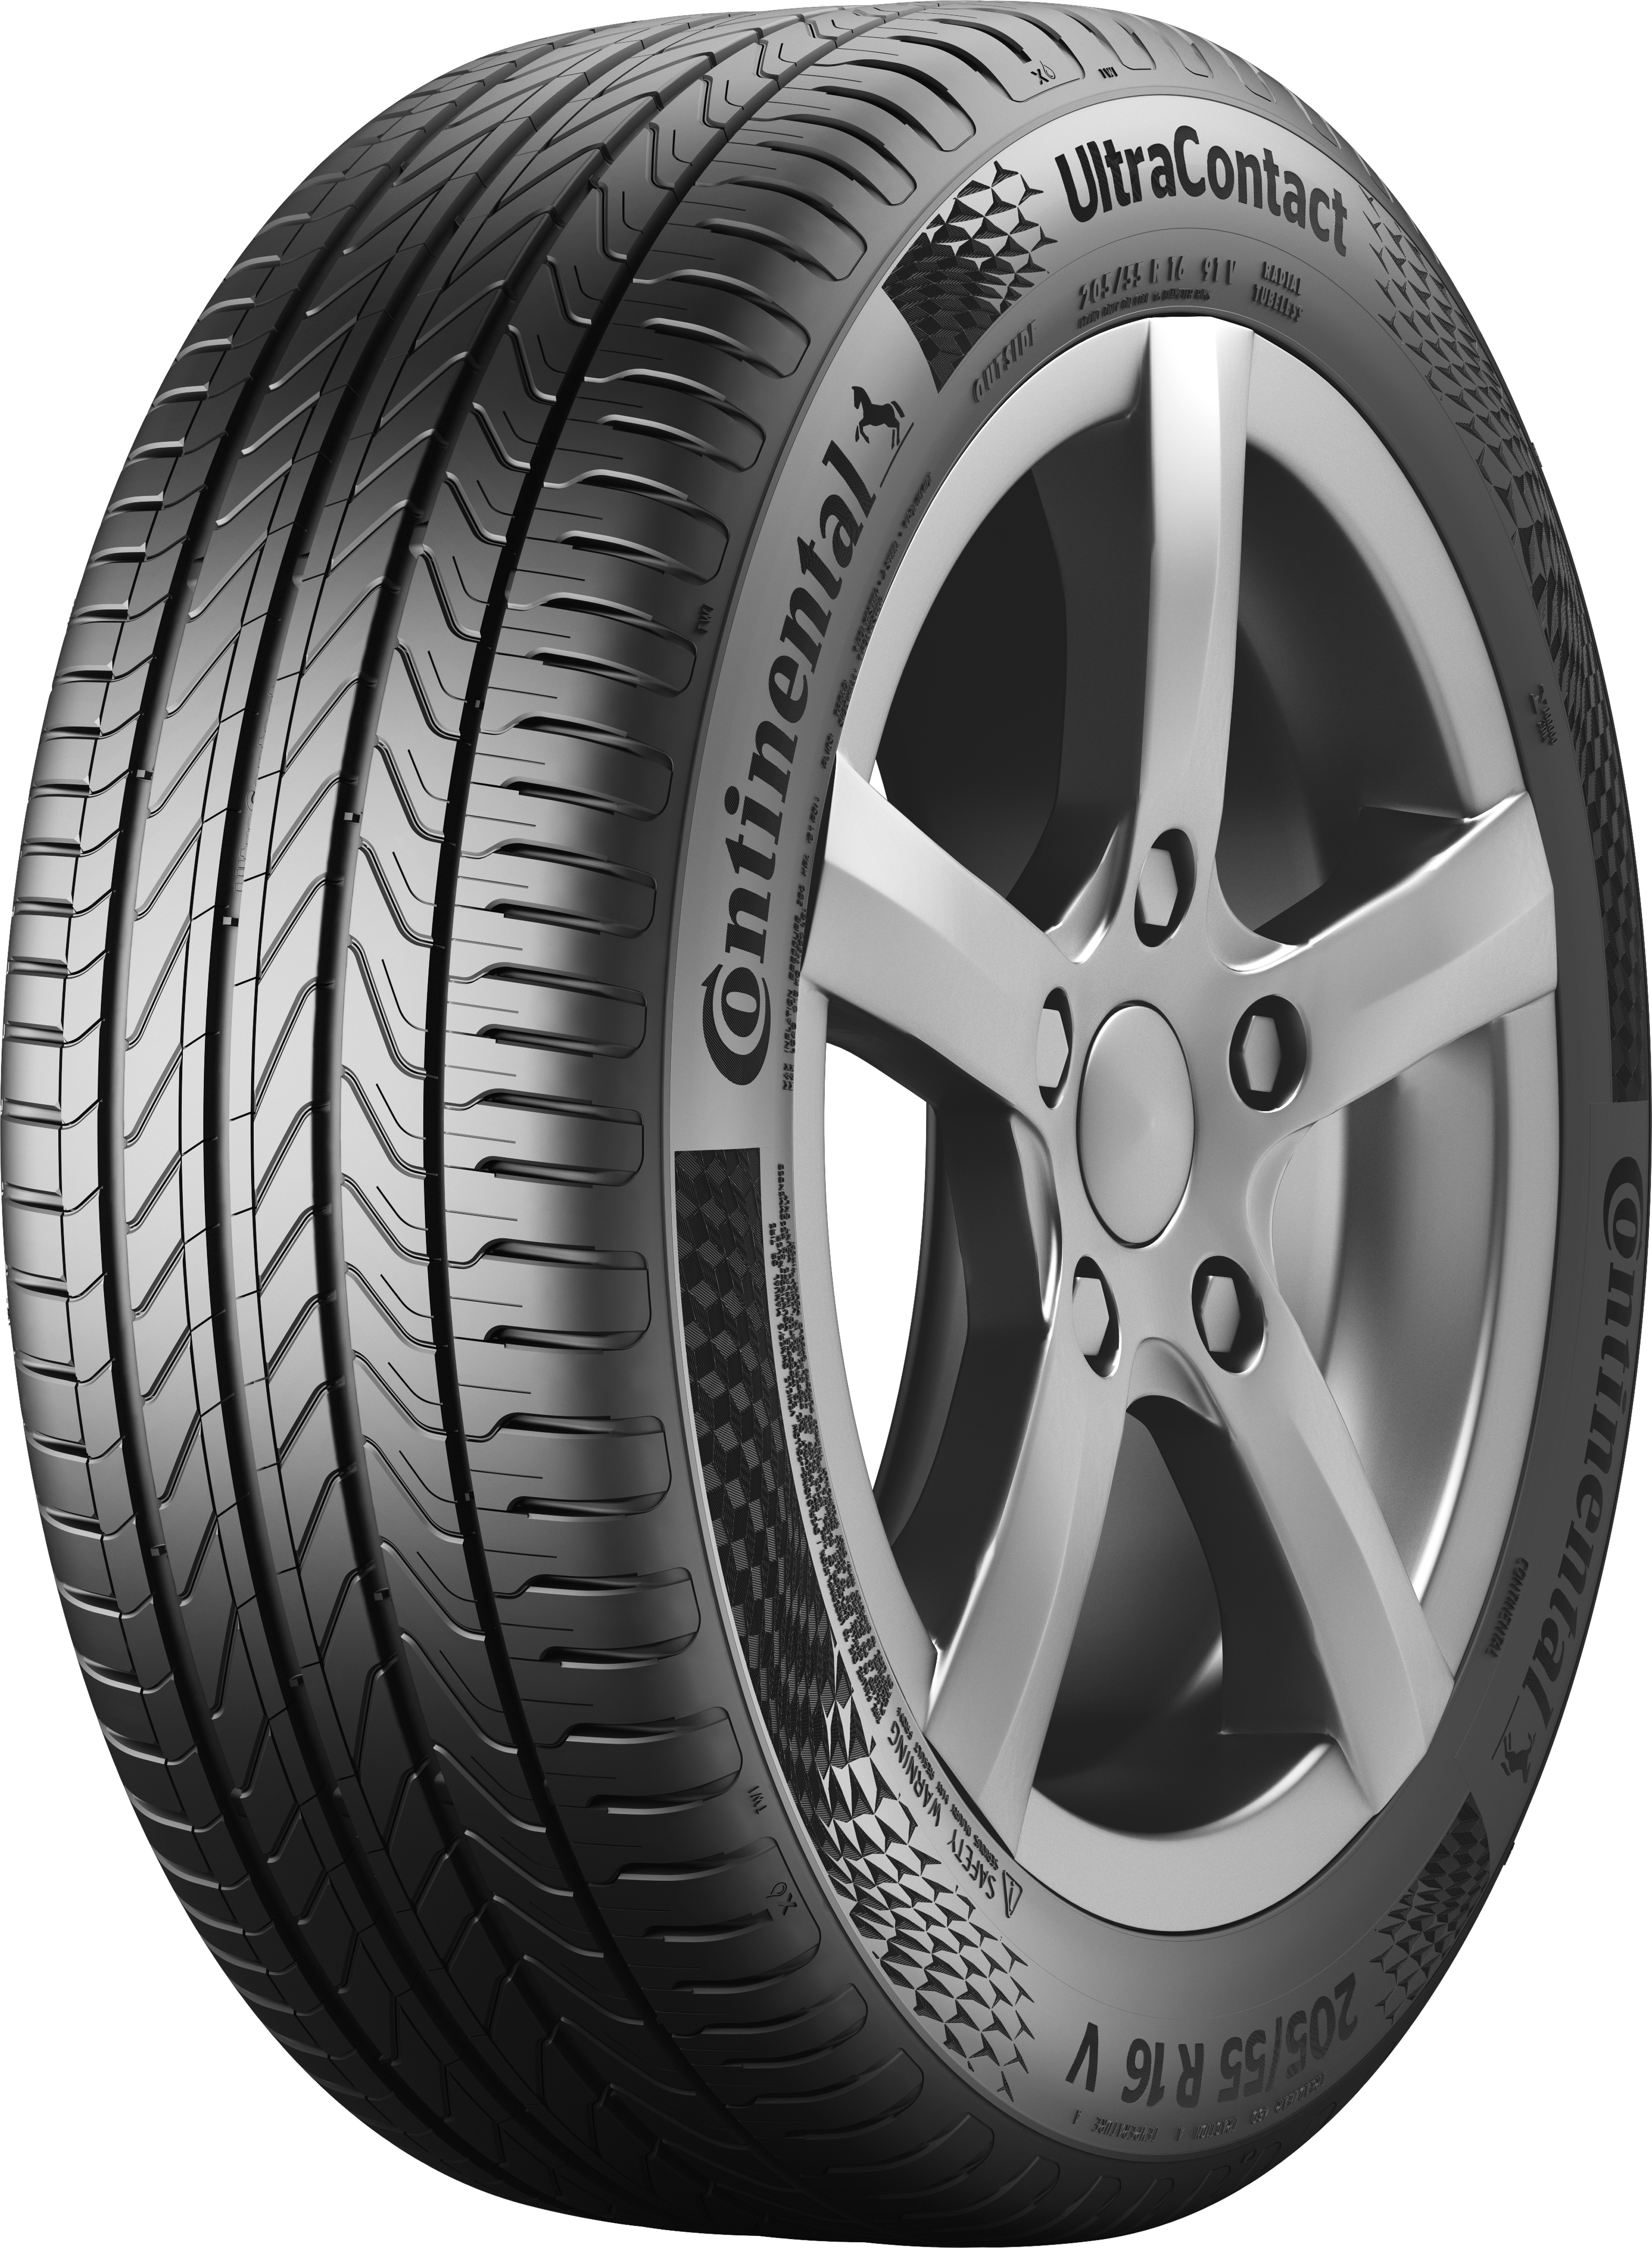 The new Continental UltraContact AG Continental - summer tire